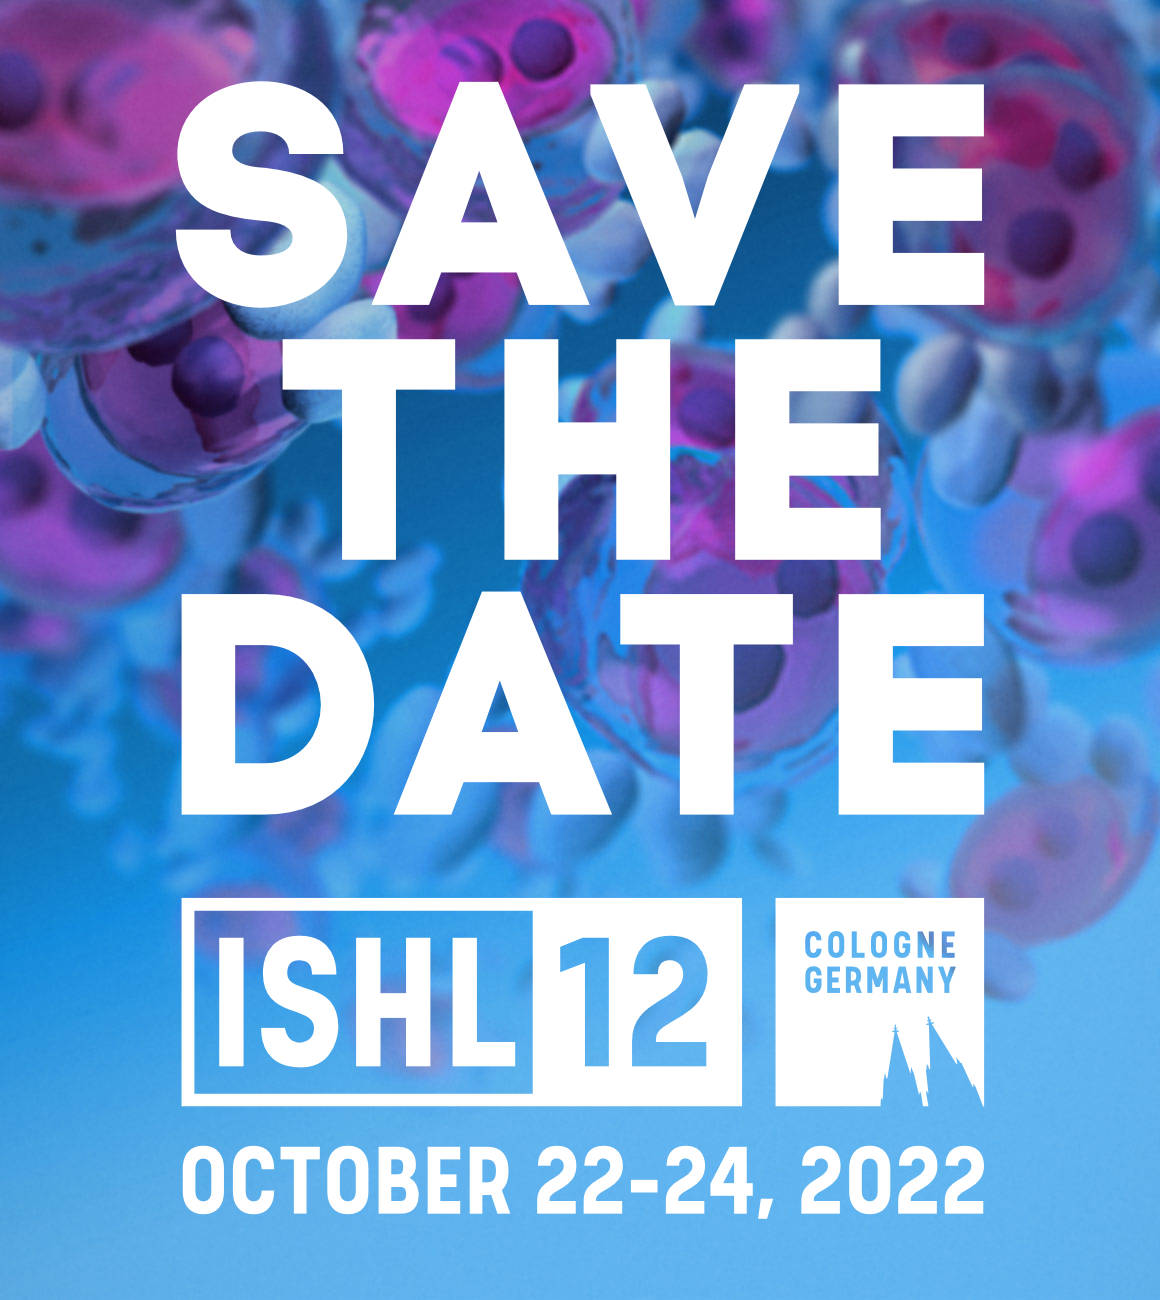 ISHL12 - Save the date